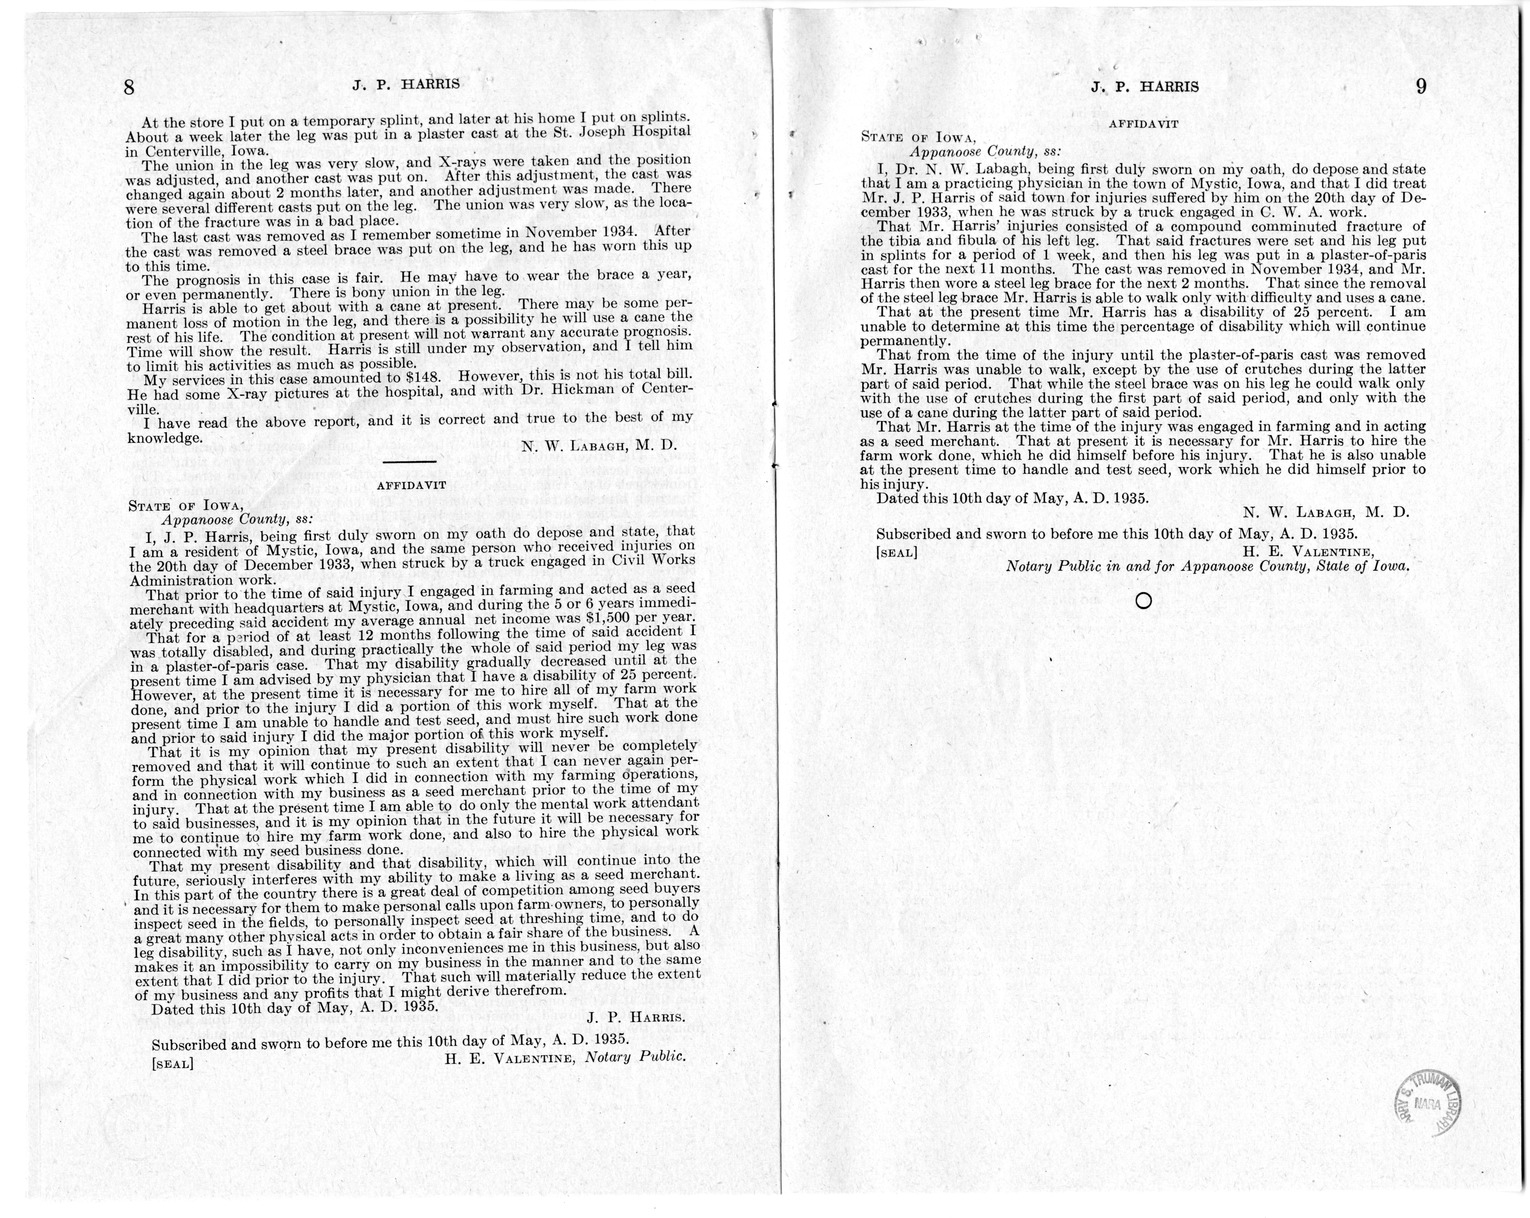 Memorandum from Harold D. Smith to M. C. Latta, H.R. 1353, For the Relief of J. P. Harris, with Attachments